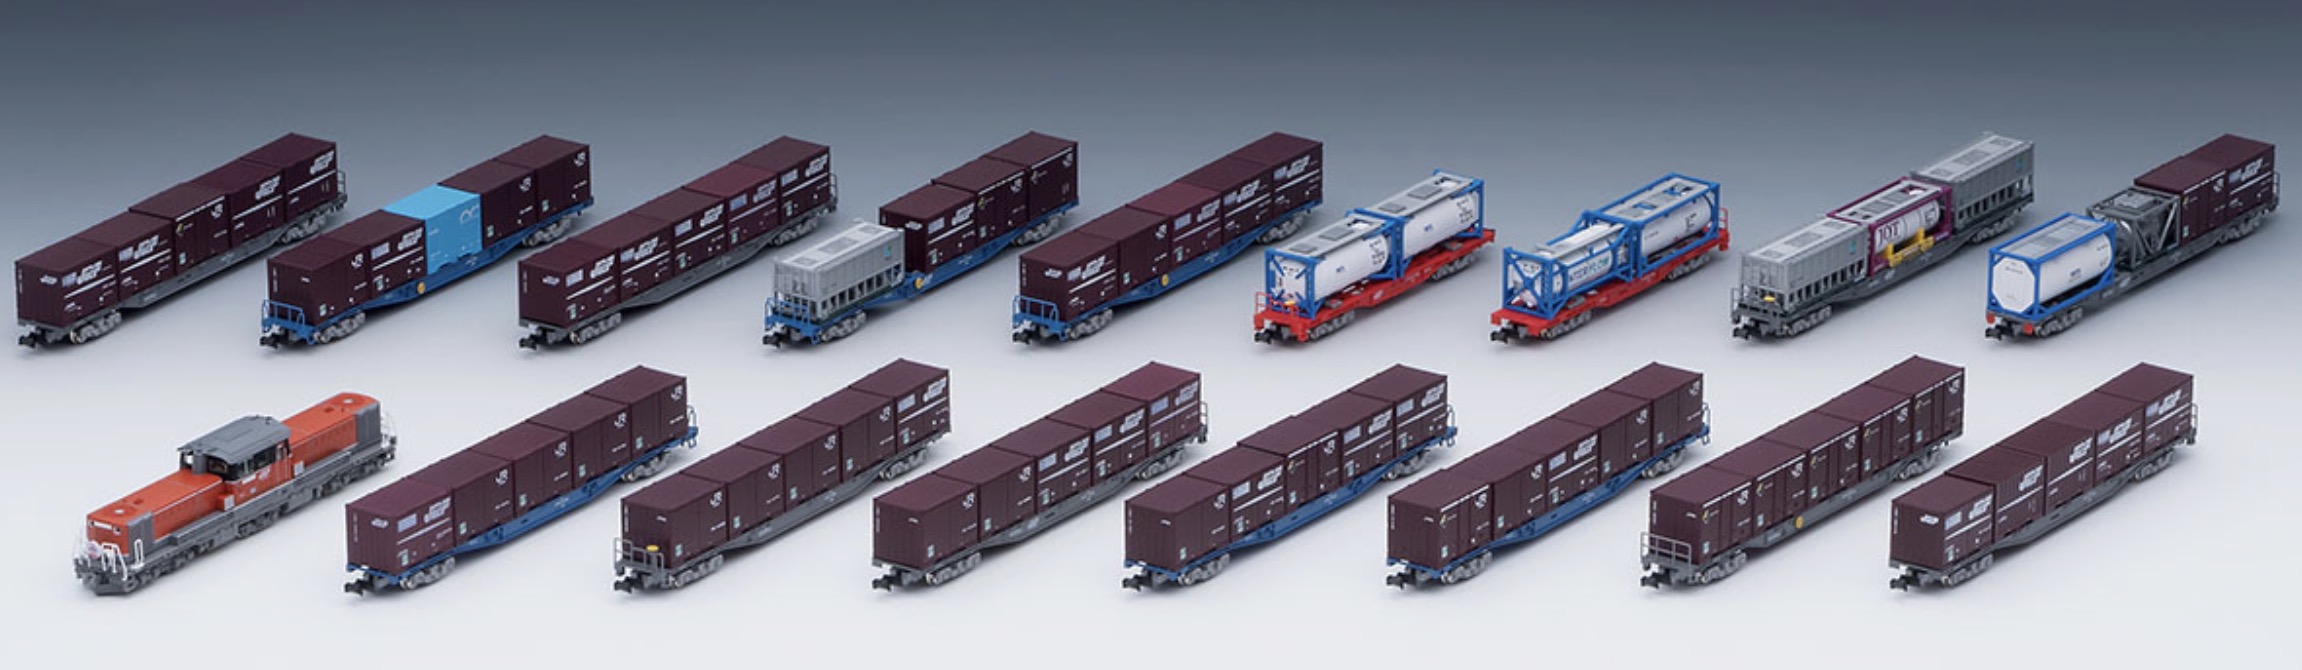 N Scale - Tomix - 97944 - Freight Train, Diesel, Type DD51 - Japan Railways Freight - 17-Pack